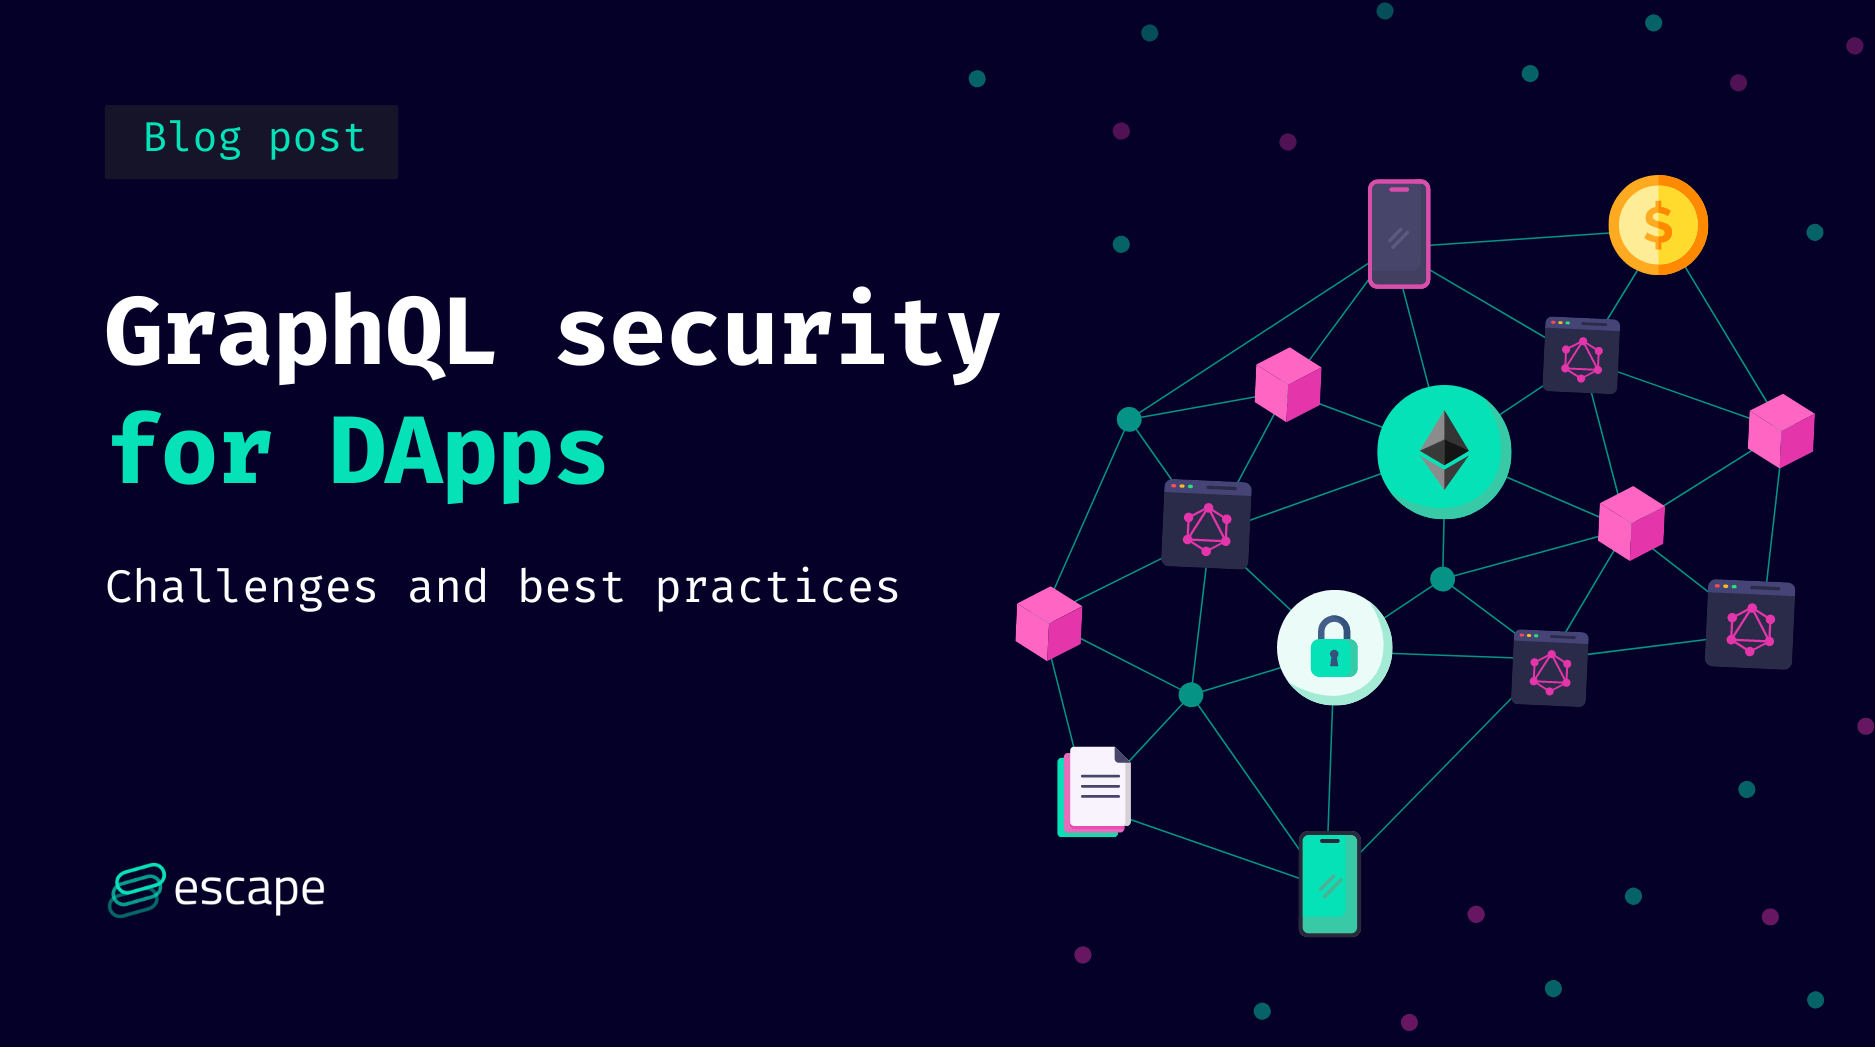 GraphQL security for decentralized applications (DApps): challenges and best practices